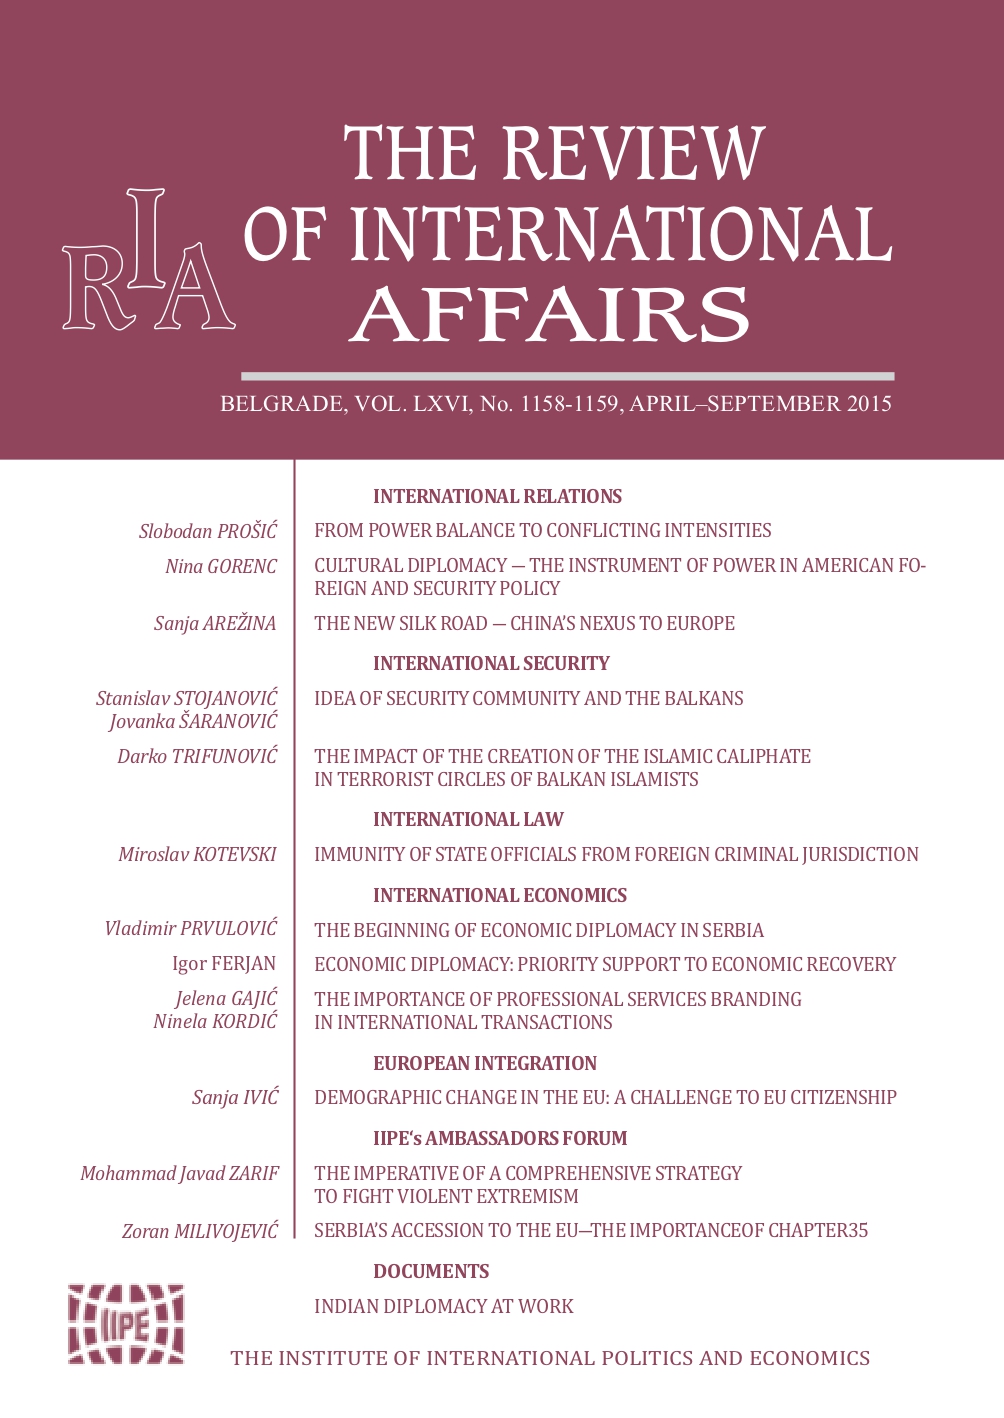 From power balance to conflicting intensities: toward a new paradigm of international relations Cover Image